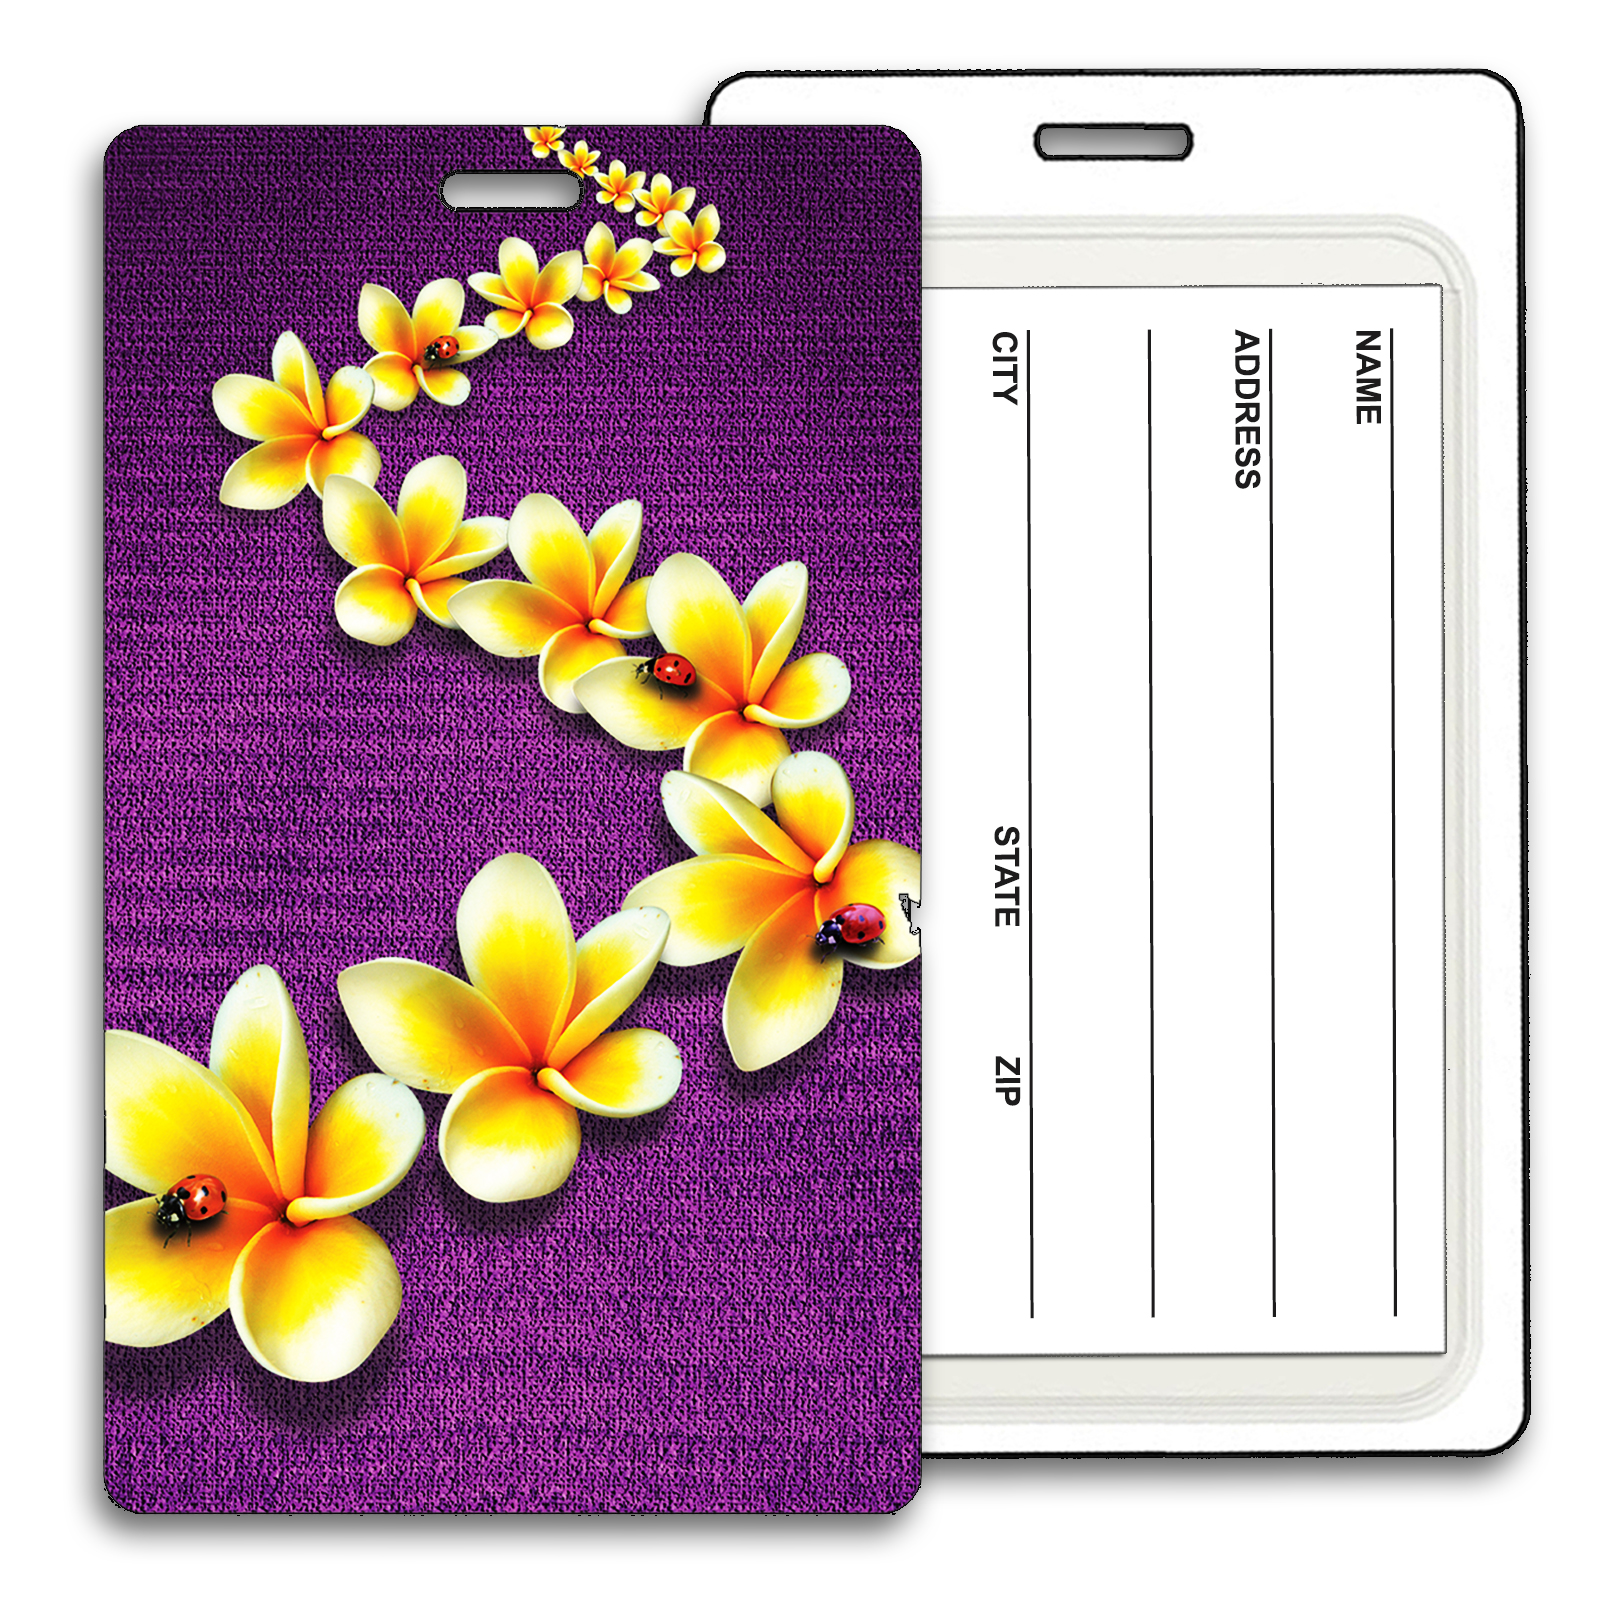 3D Lenticular Image luggage tag